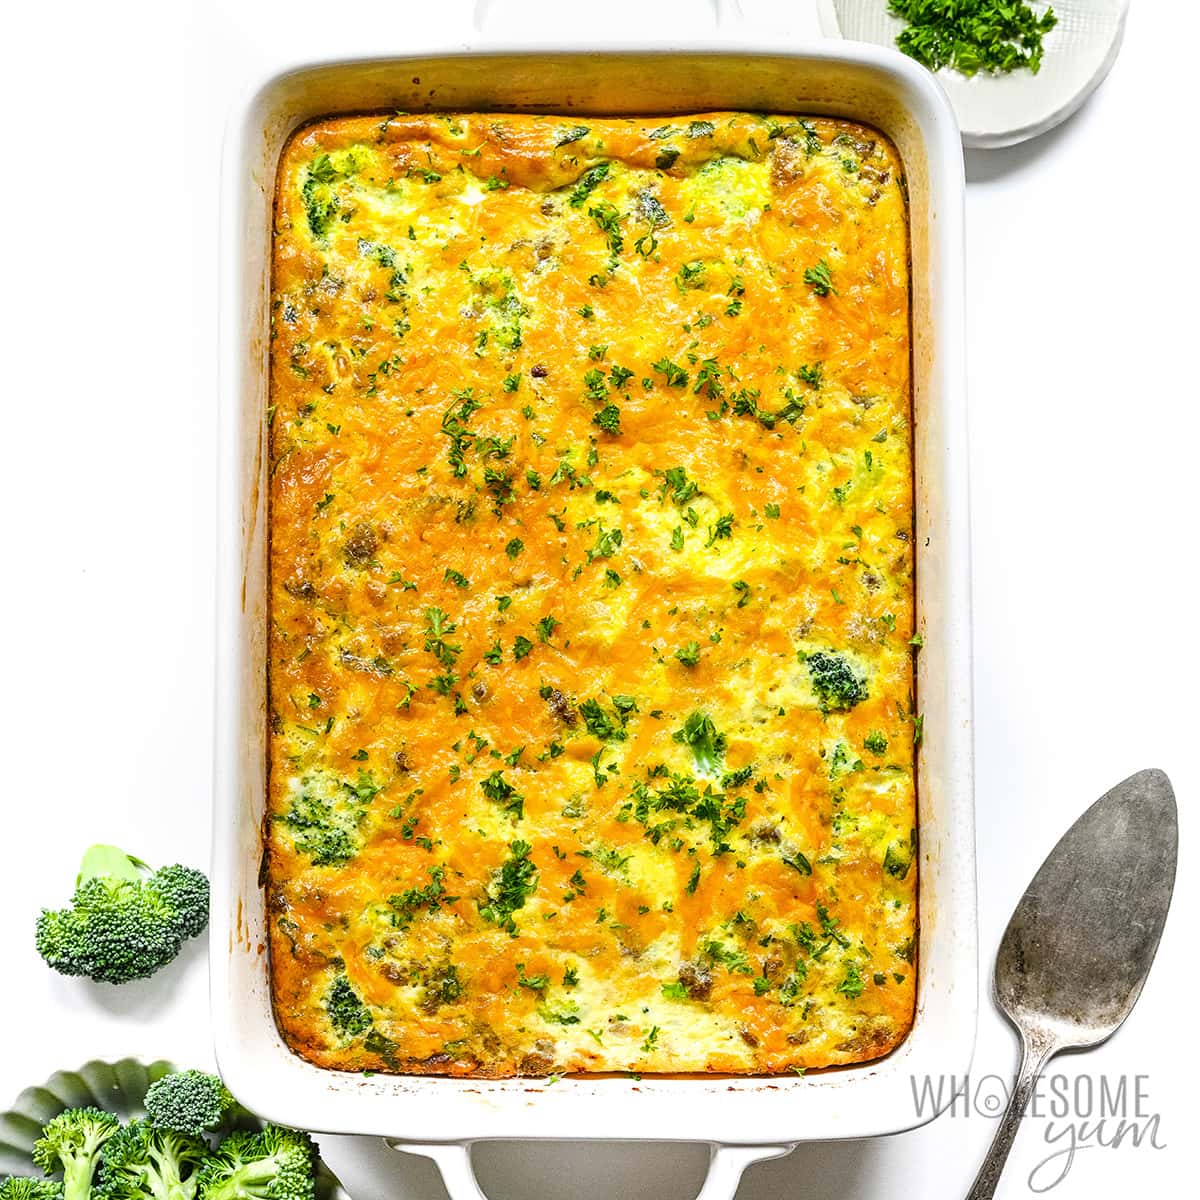 Sausage, egg and cheese casserole in a baking dish.